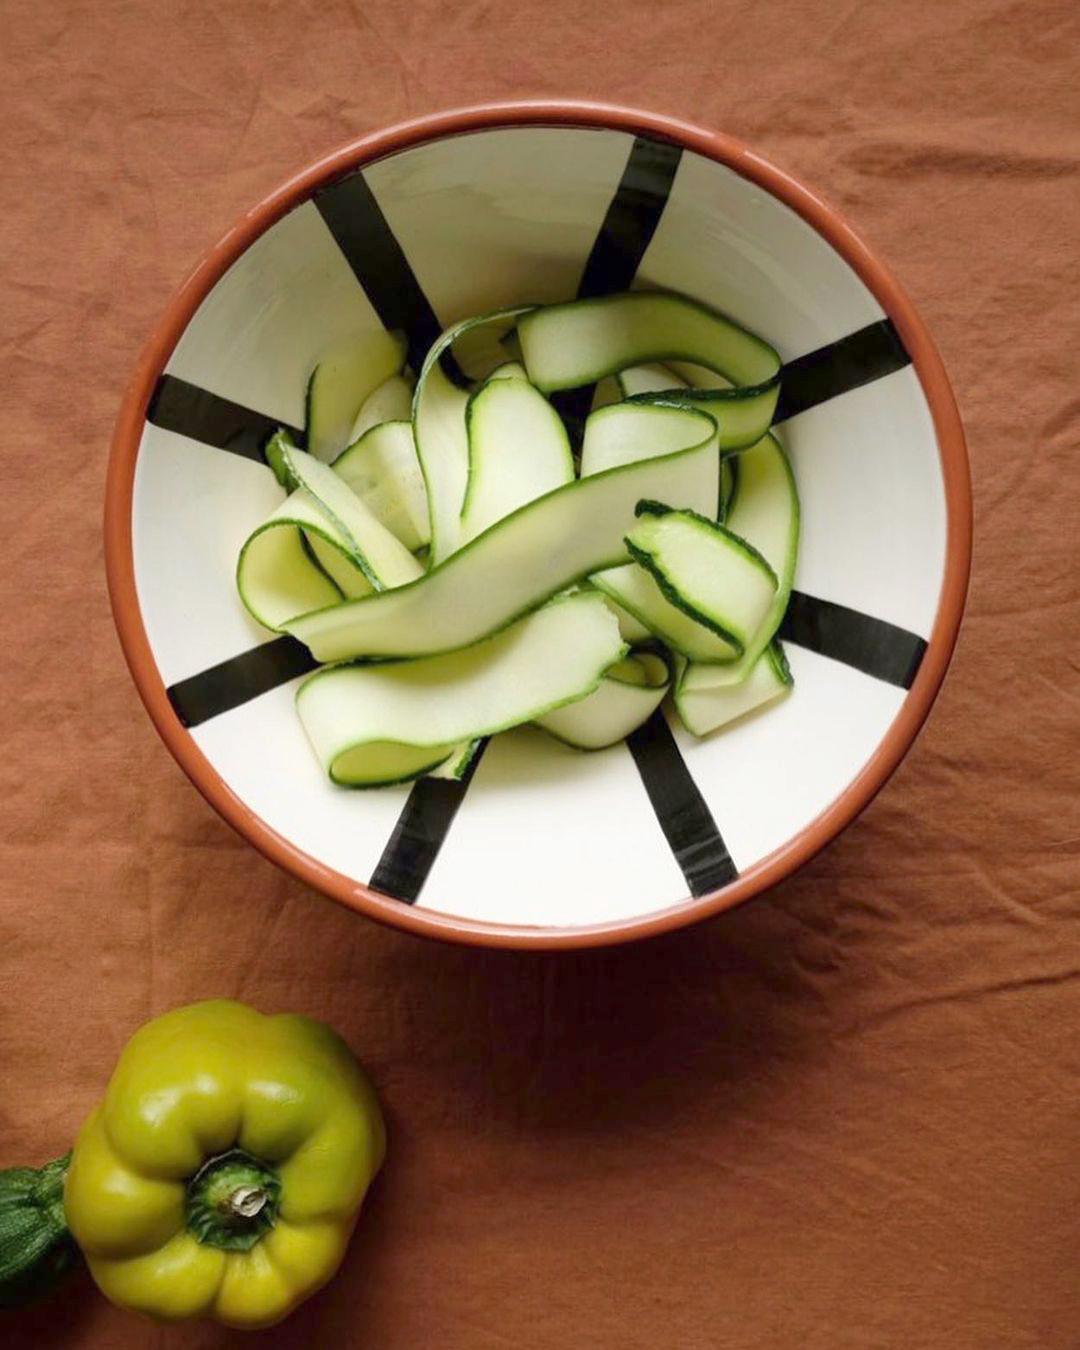 A graphic bowl for your kitchen
Introducing Casa Cubista's Segment Bowls, the irresistibly cute way to spice up your dinner party! These playful, terracotta bowls are handmade with white and black glaze, and perfect for hosting condiments, sauces,